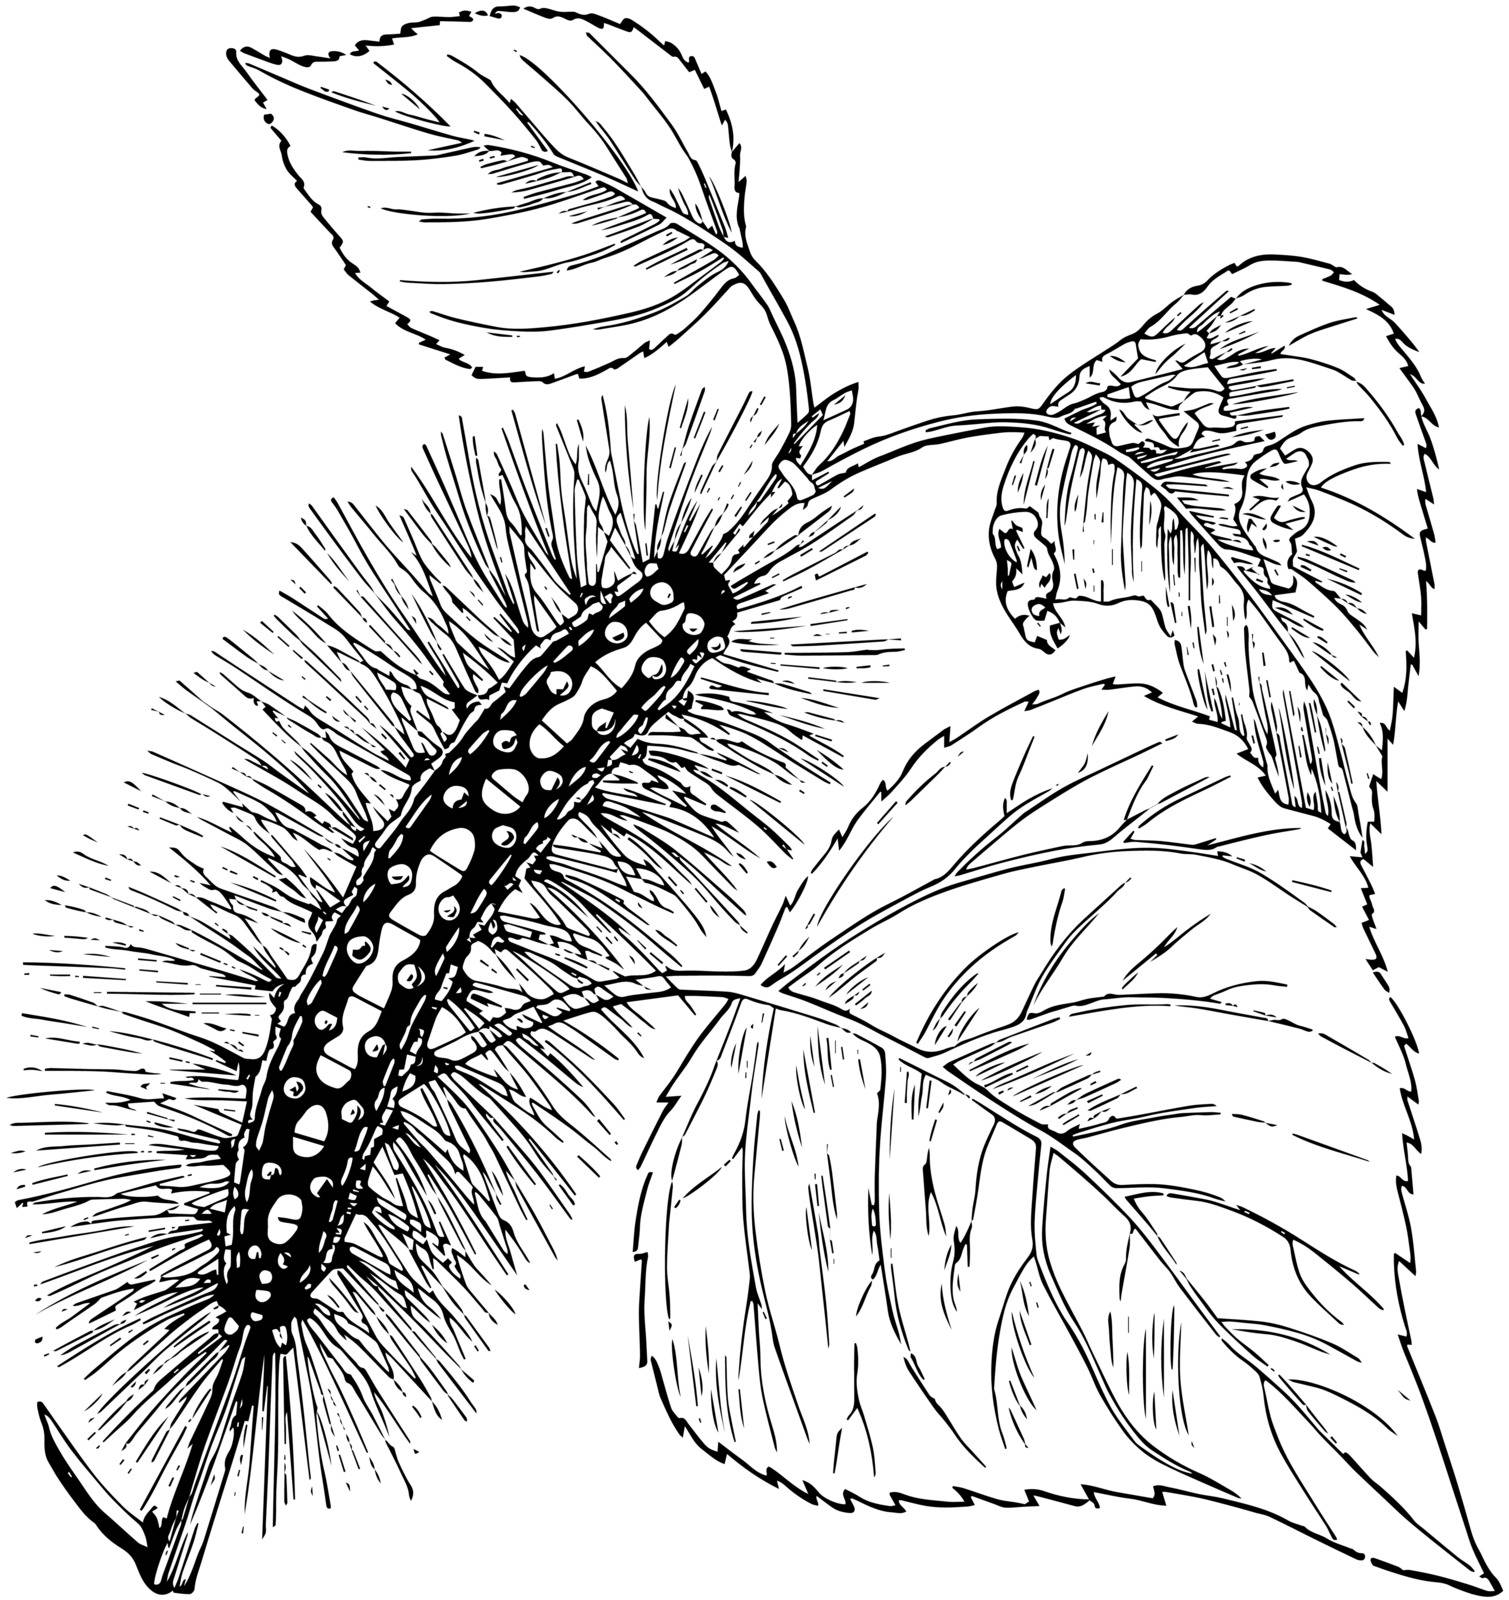 Caterpillar of the Satin Moth is the common name of liparis salicis, vintage line drawing or engraving illustration.